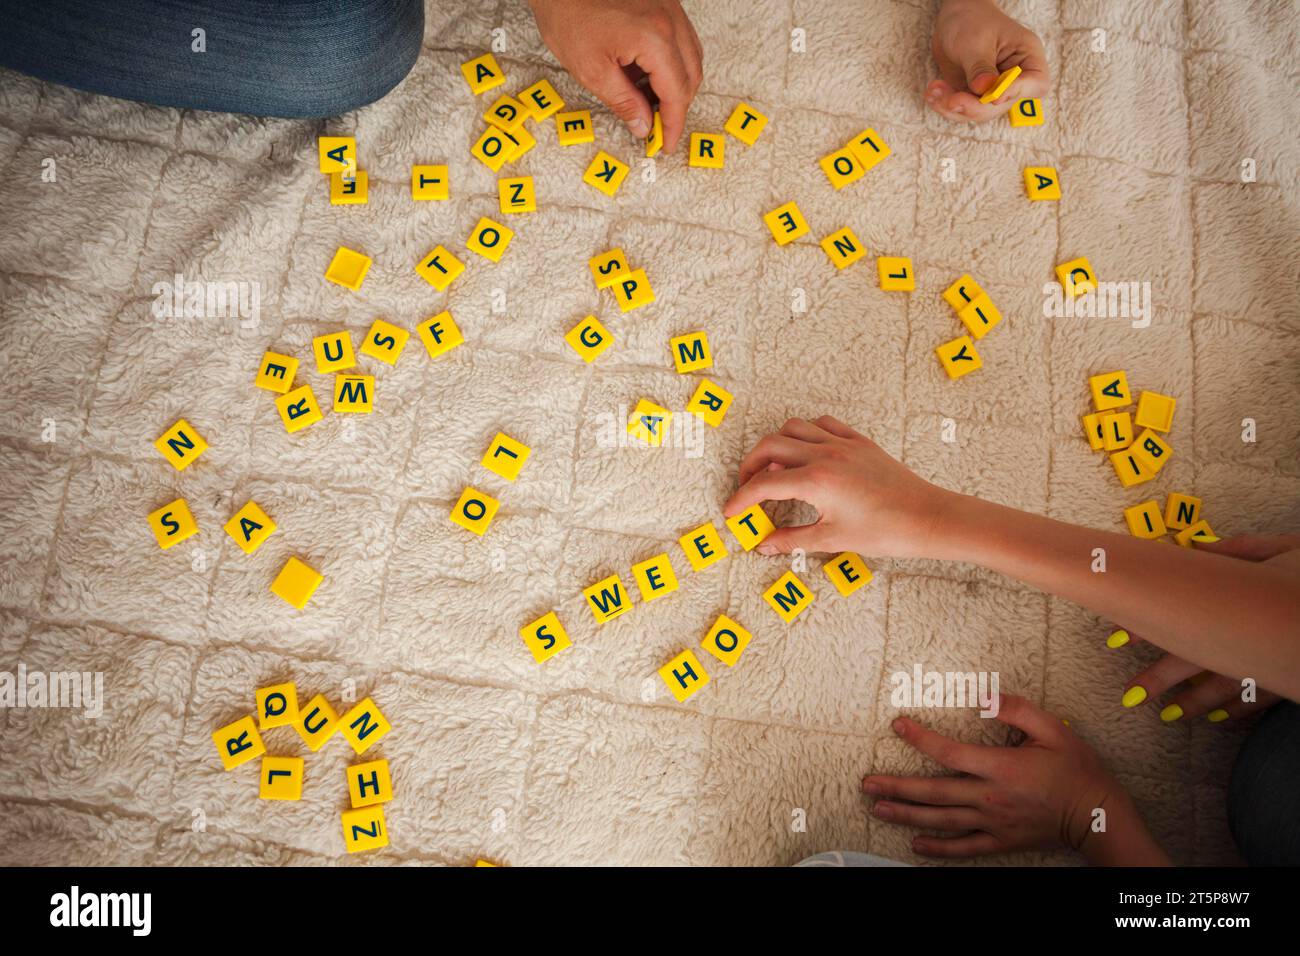 High angle view hand playing scrabble game carpet Stock Photo